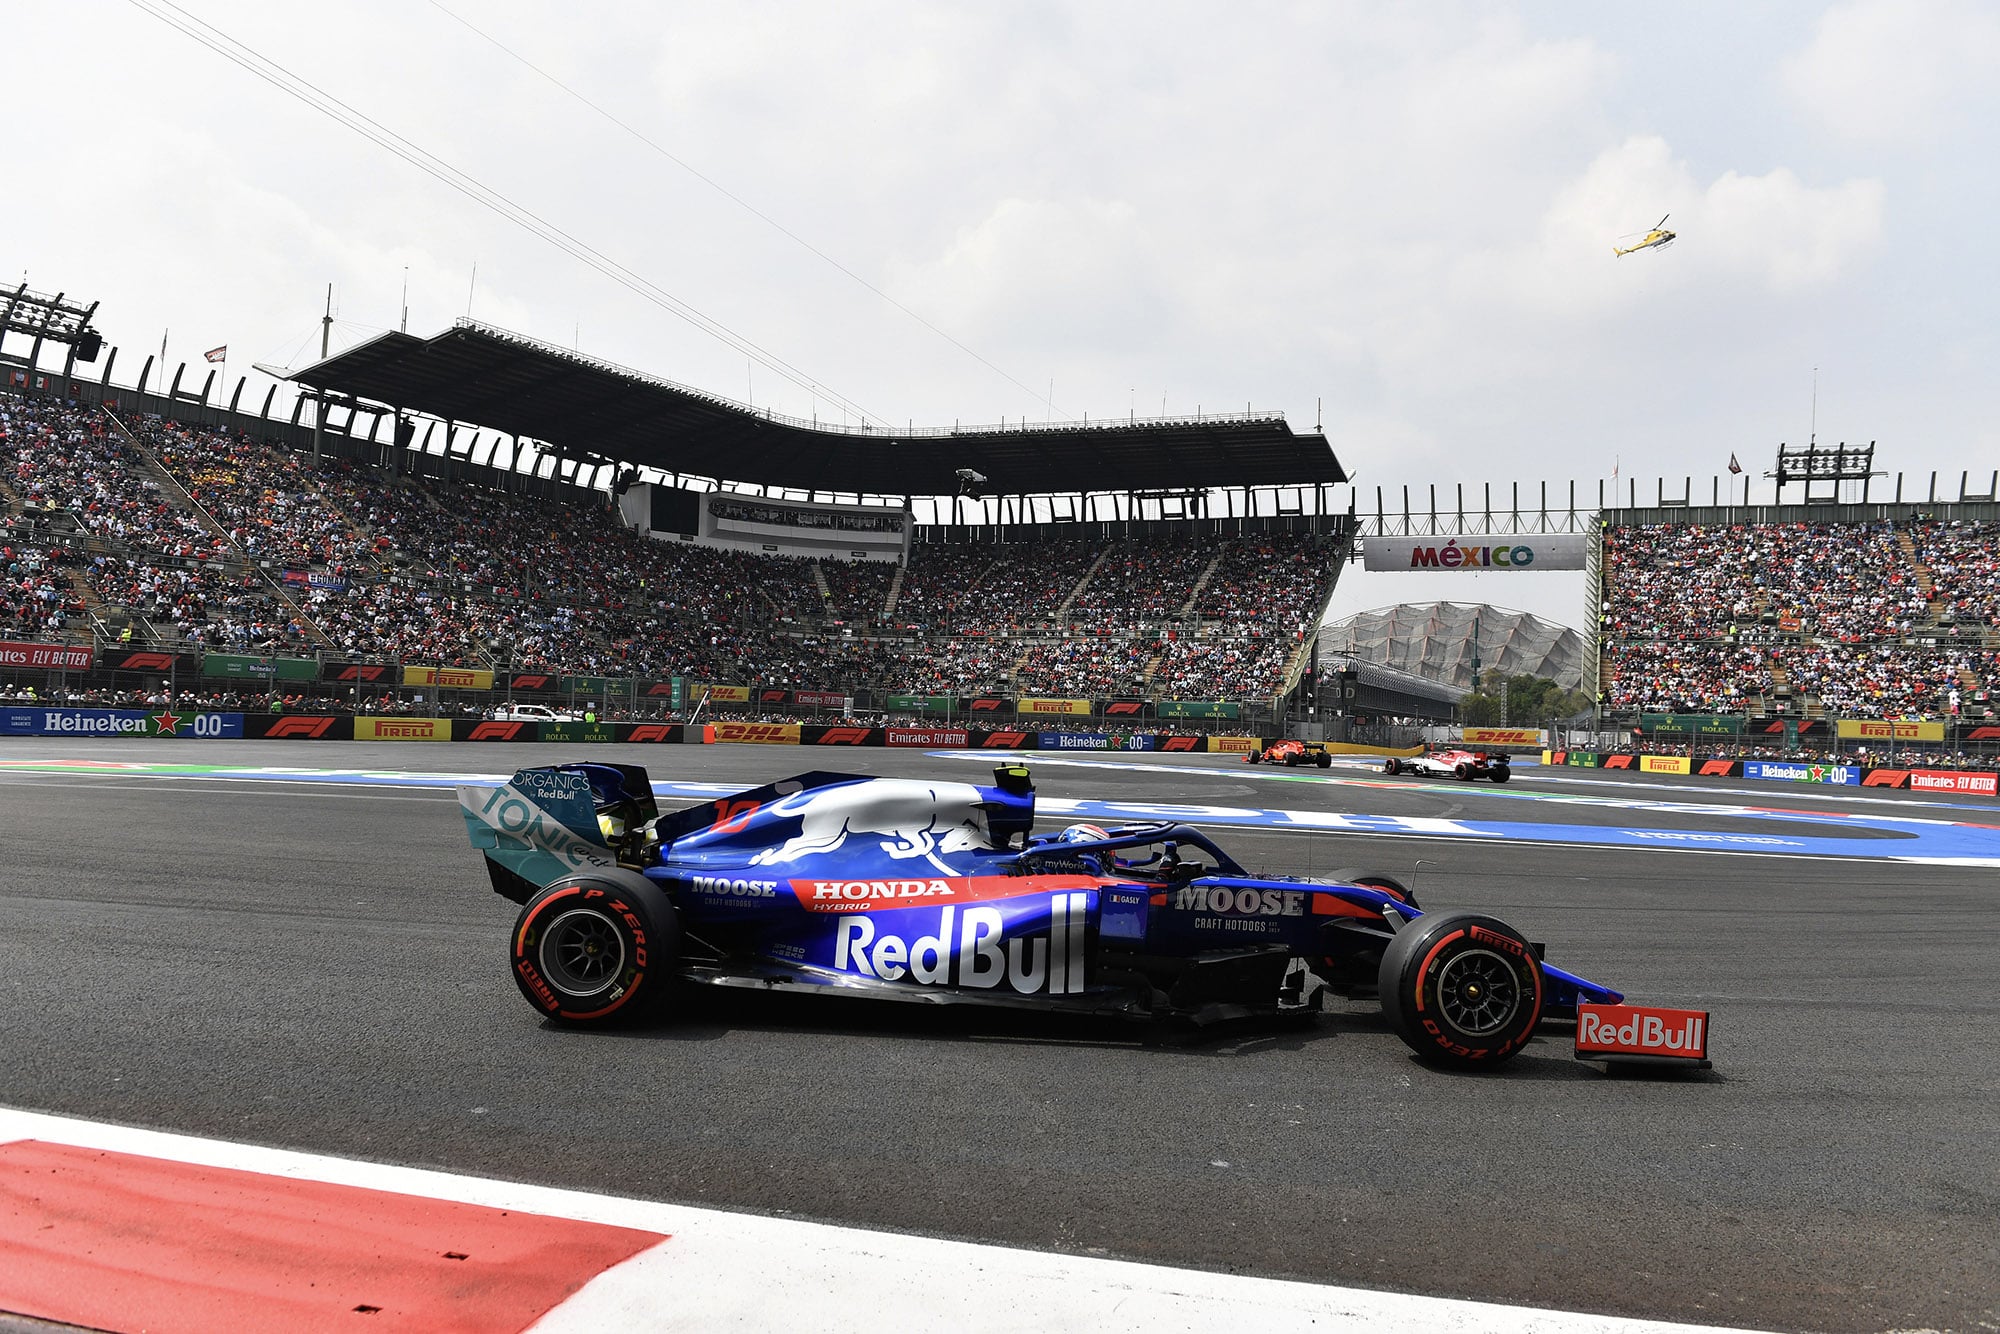 Toro Rosso during qualifying for the 2019 F1 Mexican Grand Prix